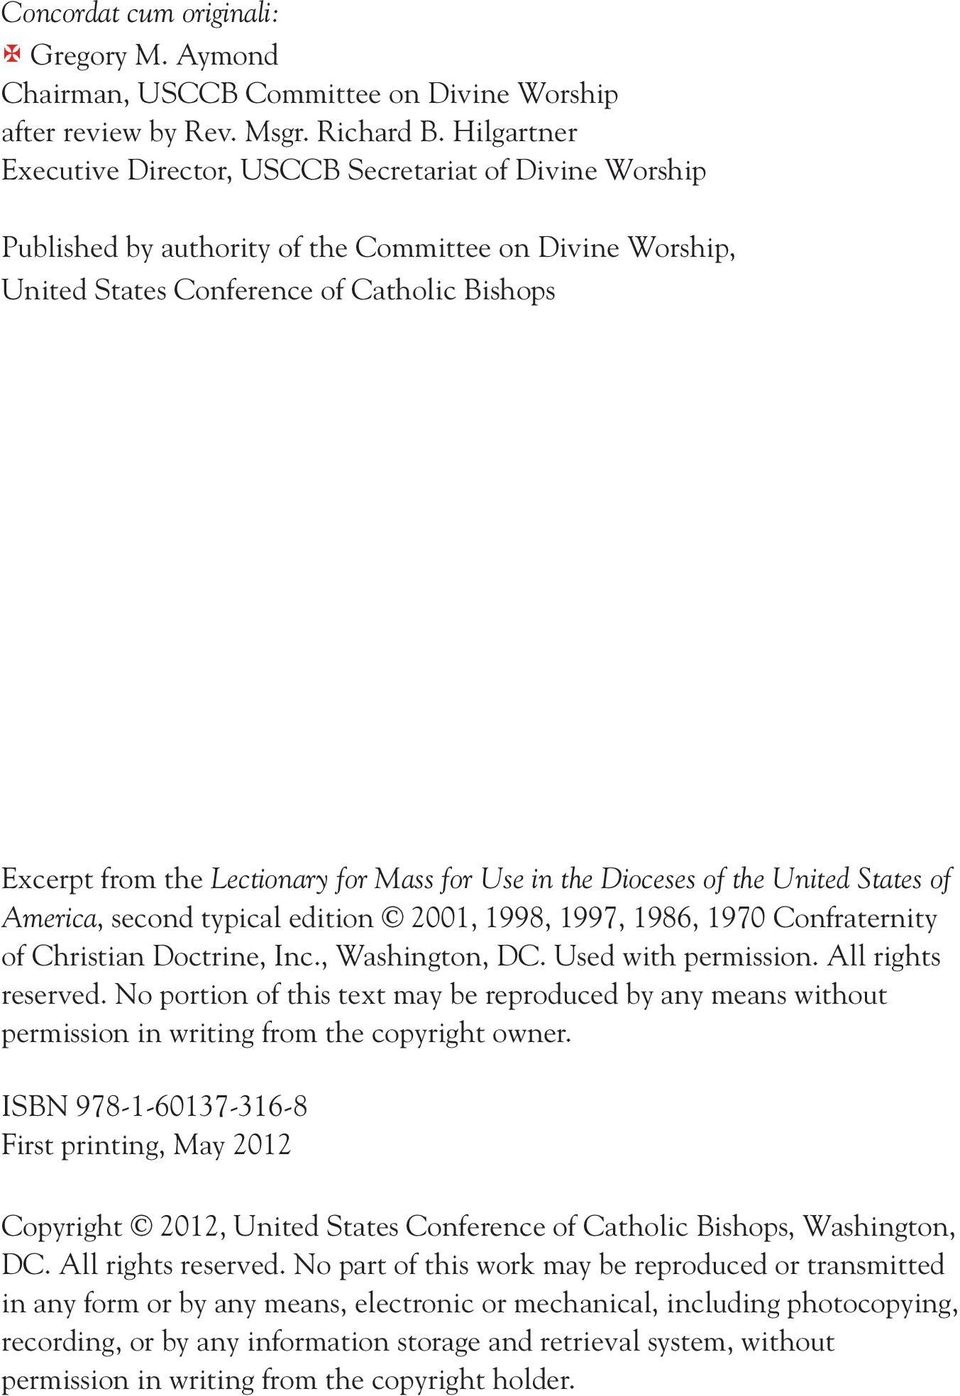 for Mass for Use in the Dioceses of the United States of America, second typical edition 2001, 1998, 1997, 1986, 1970 Confraternity of Christian Doctrine, Inc., Washington, DC. Used with permission.